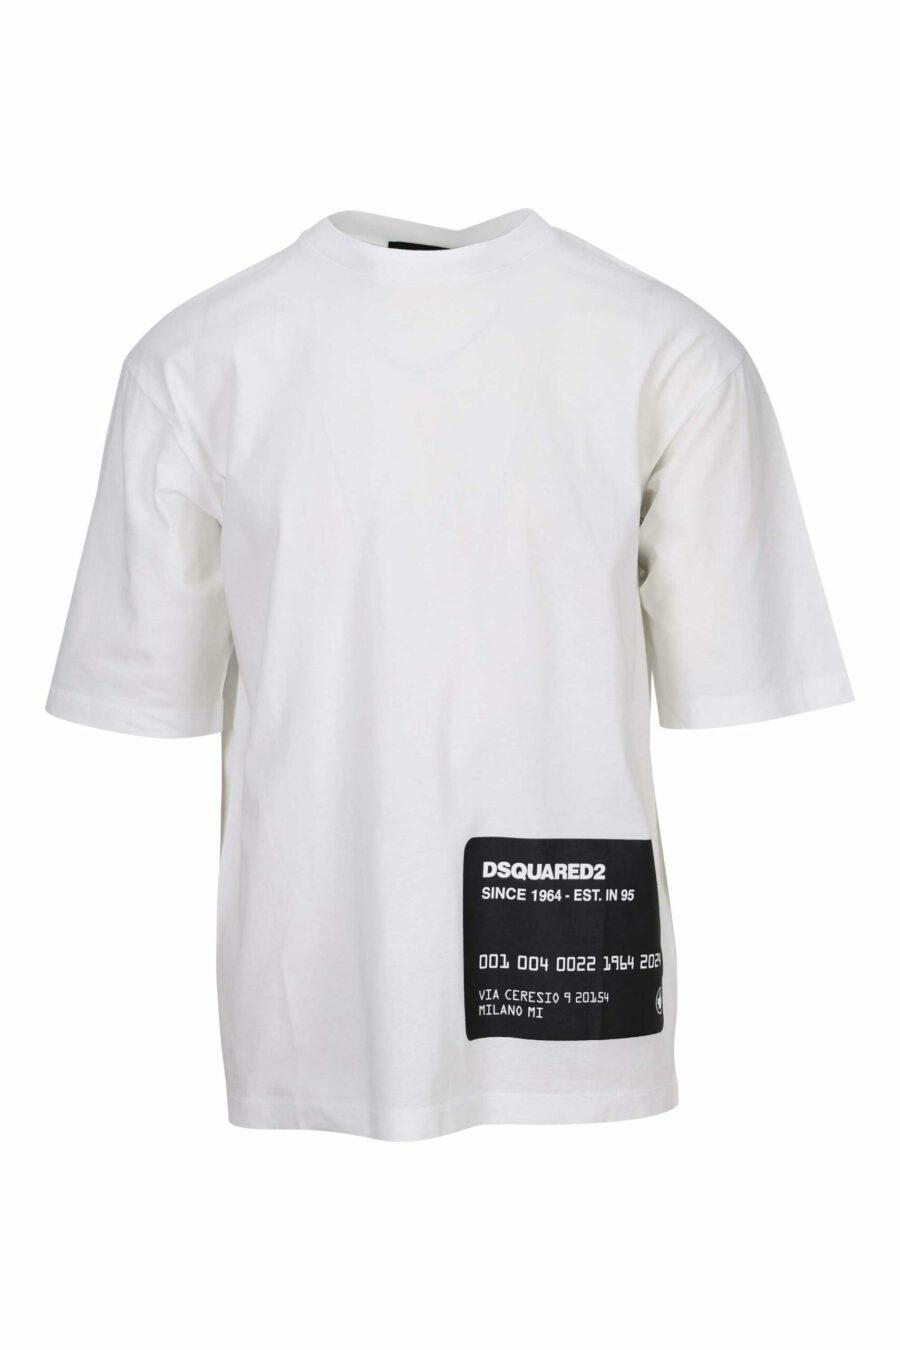 Oversize white T-shirt with credit card logo underneath - 8054148265540 scaled